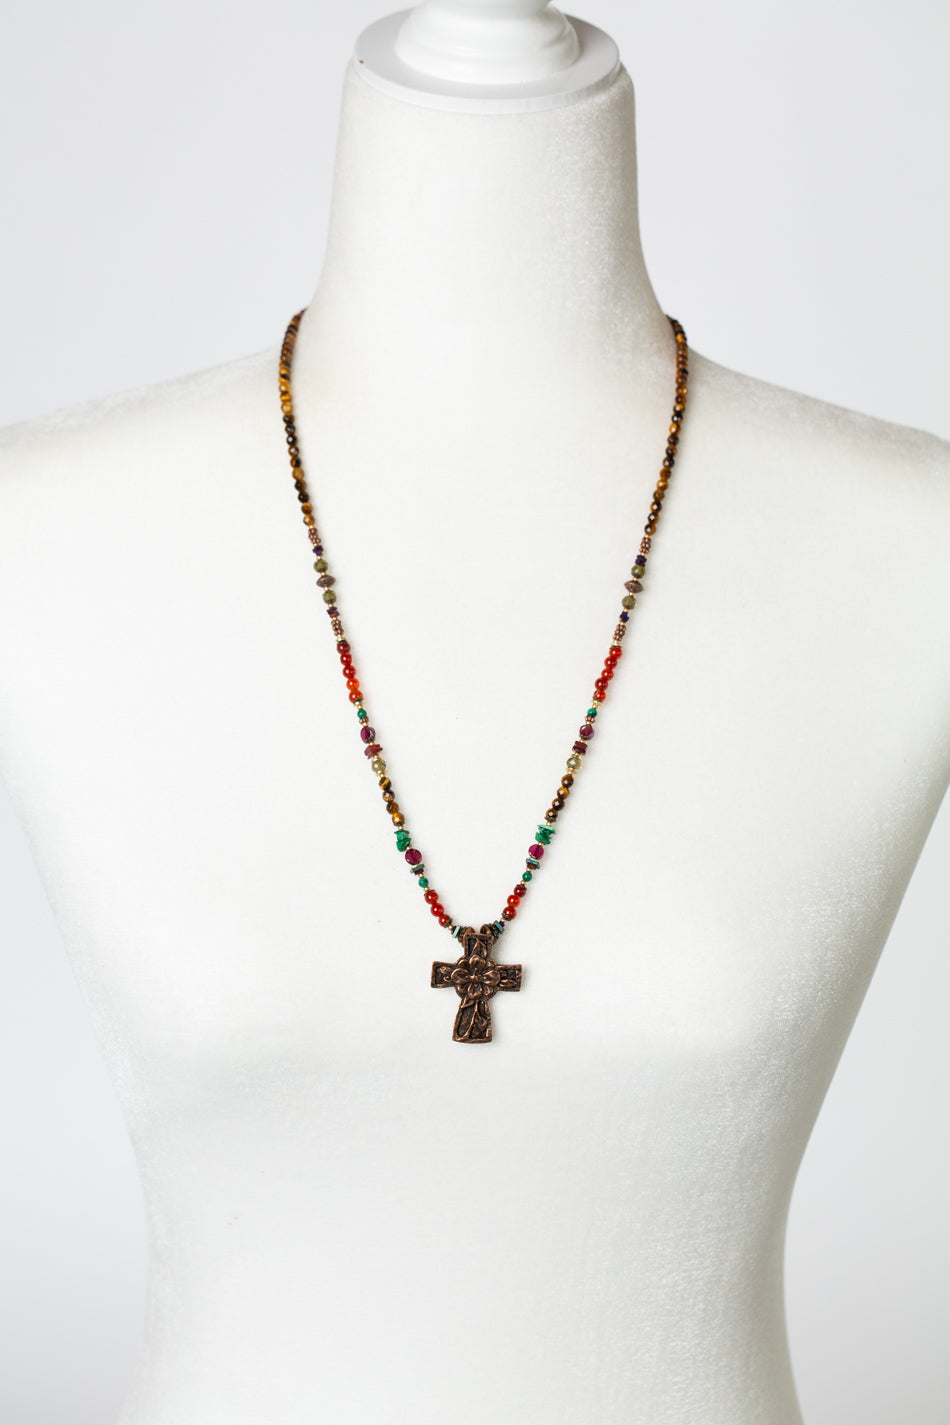 Limited Edition Adjustable Cat's Eye, Garnet With Copper Cross Statement Necklace